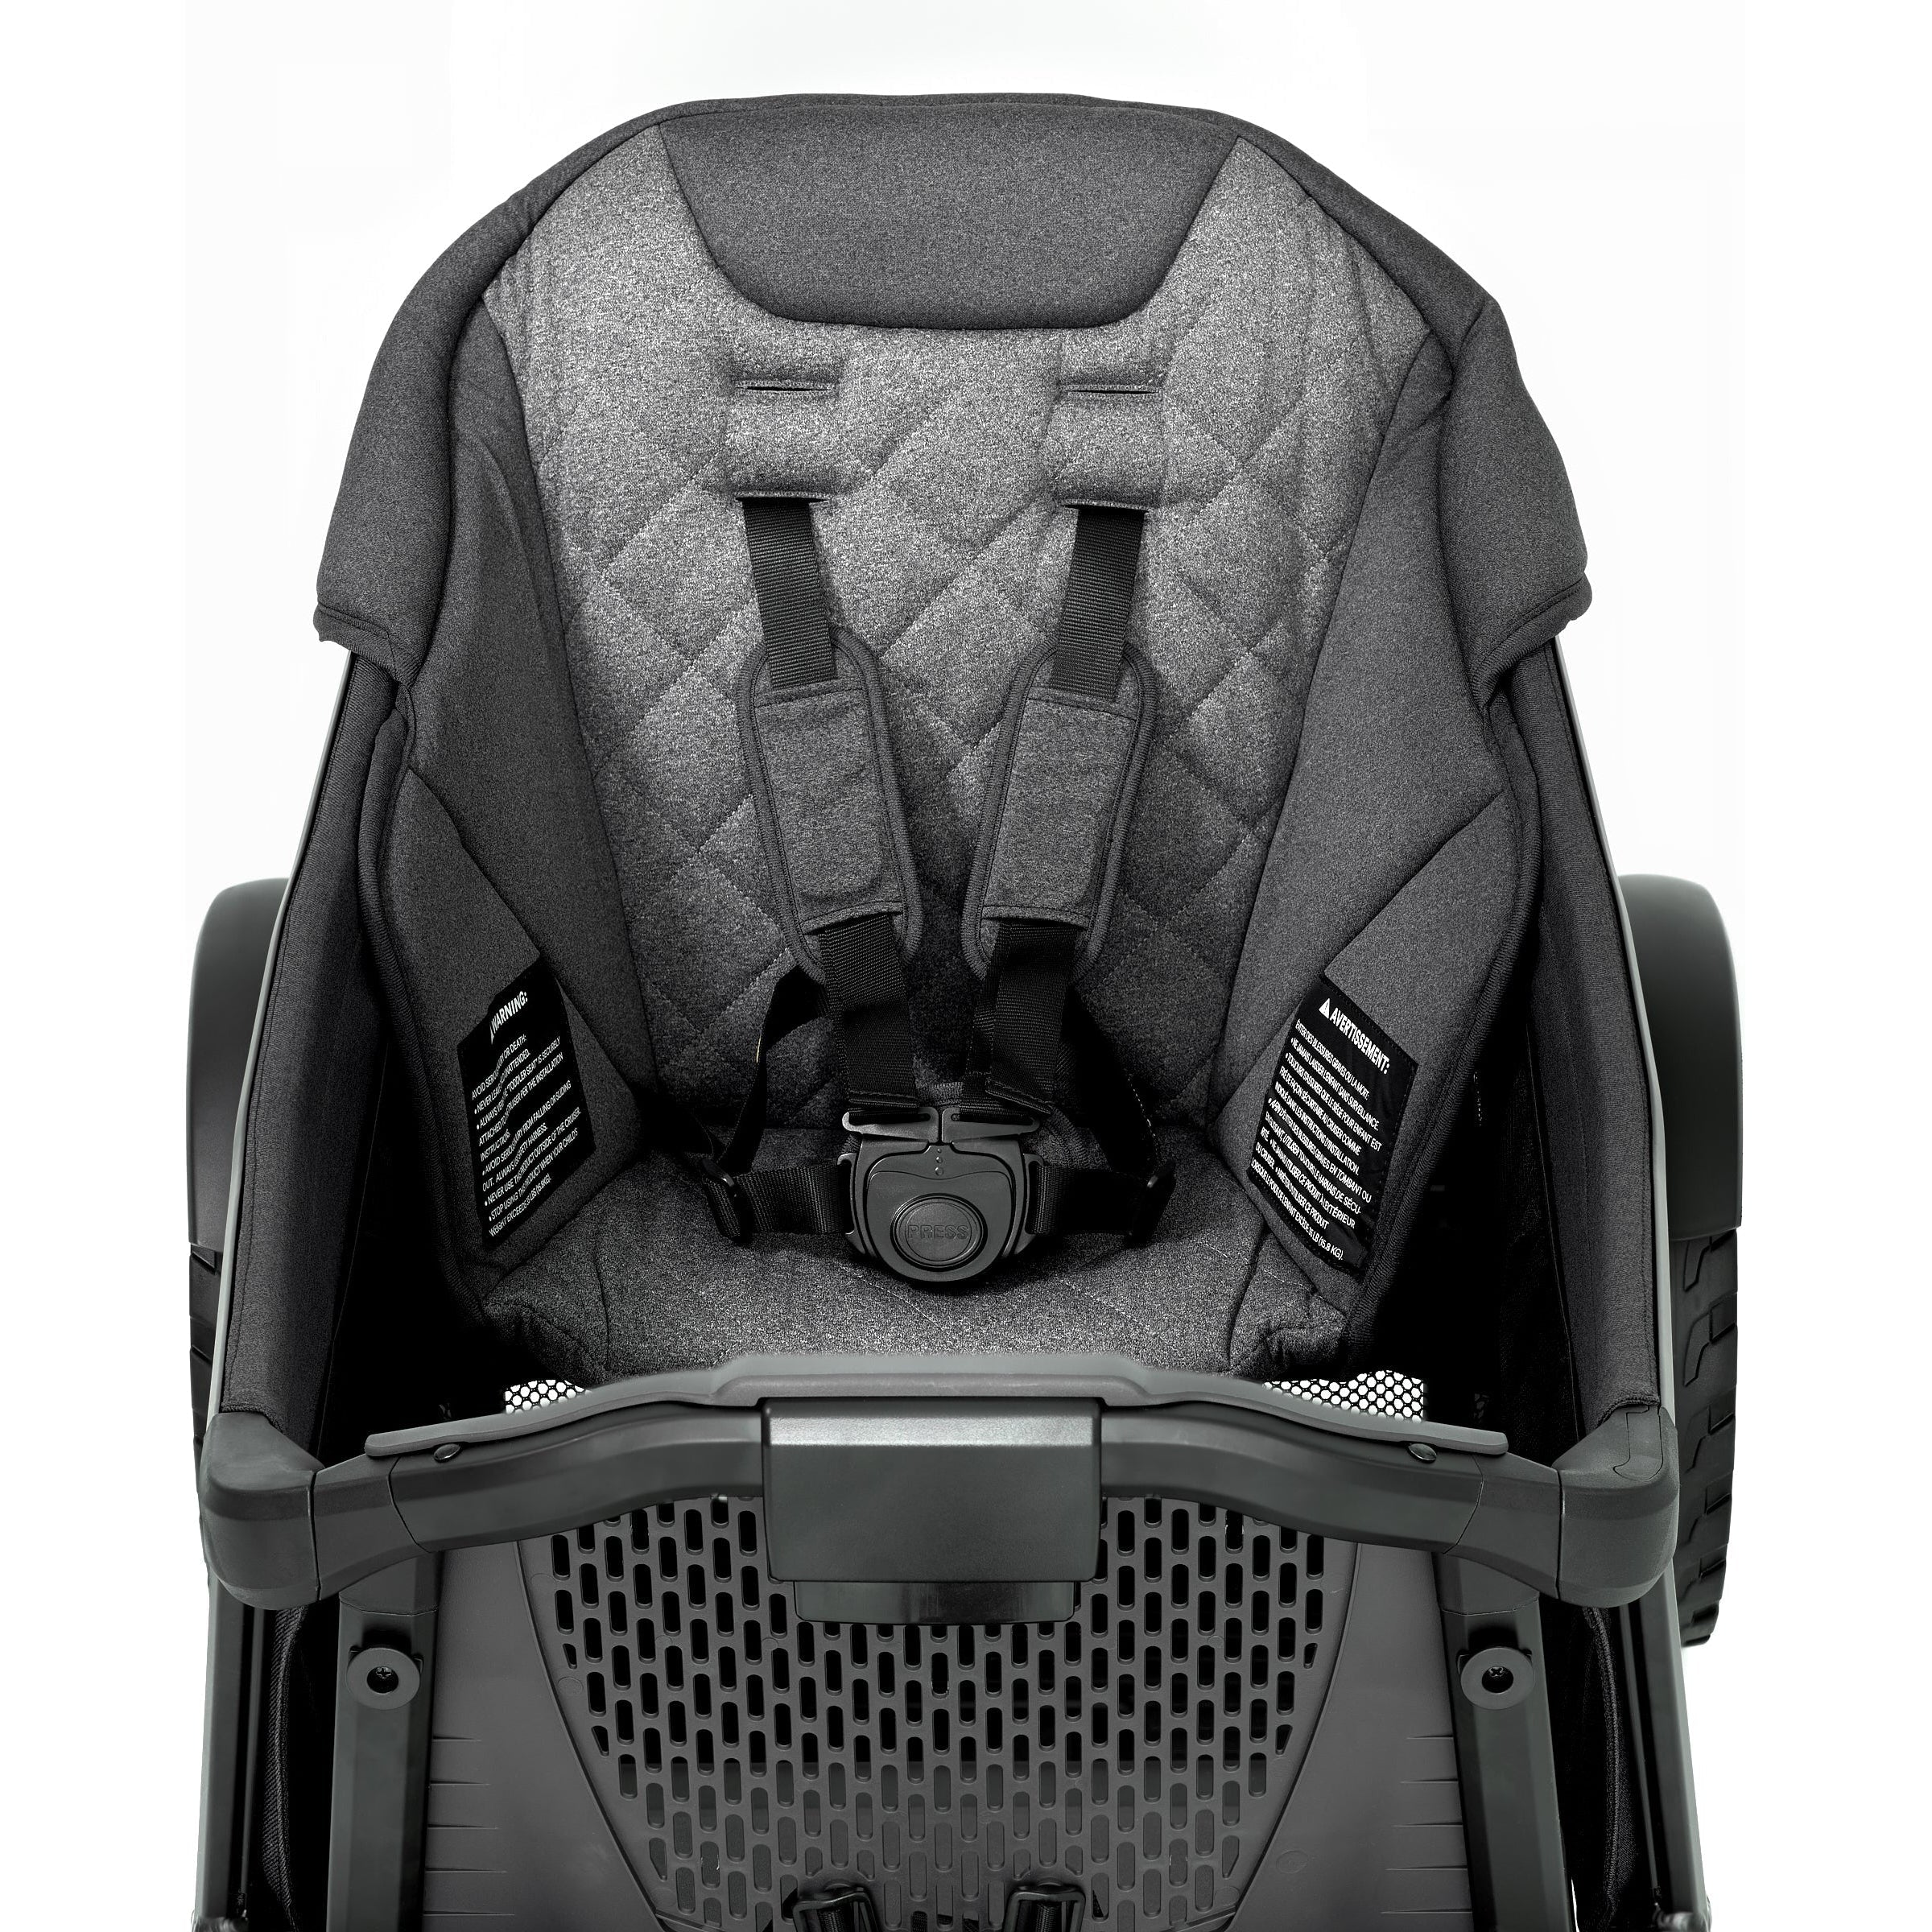 Veer Cruiser XL Comfort Seat for Toddlers